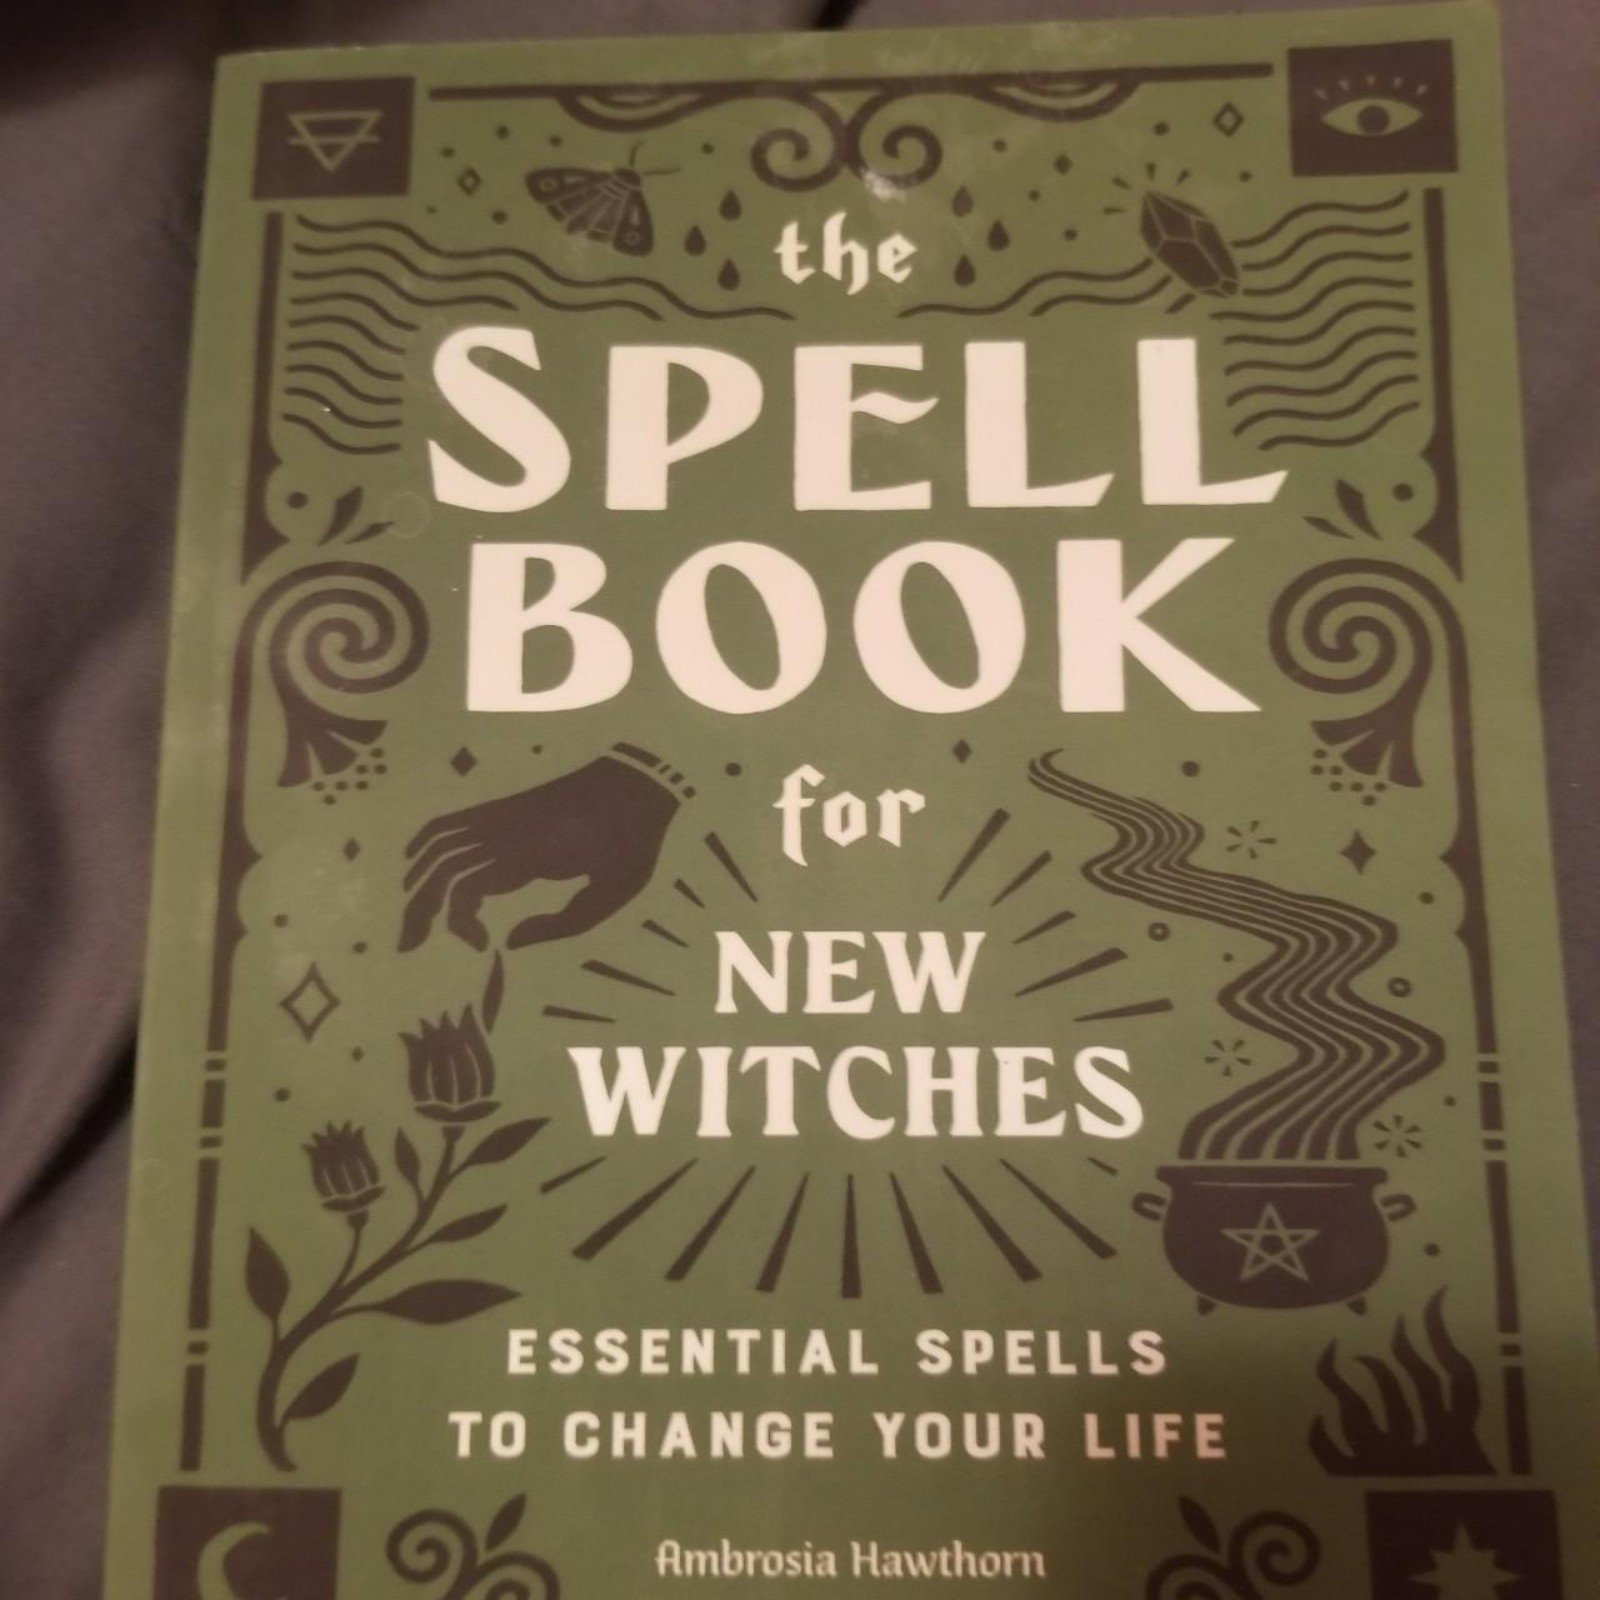 The spell book for new witches (essential spells to cha